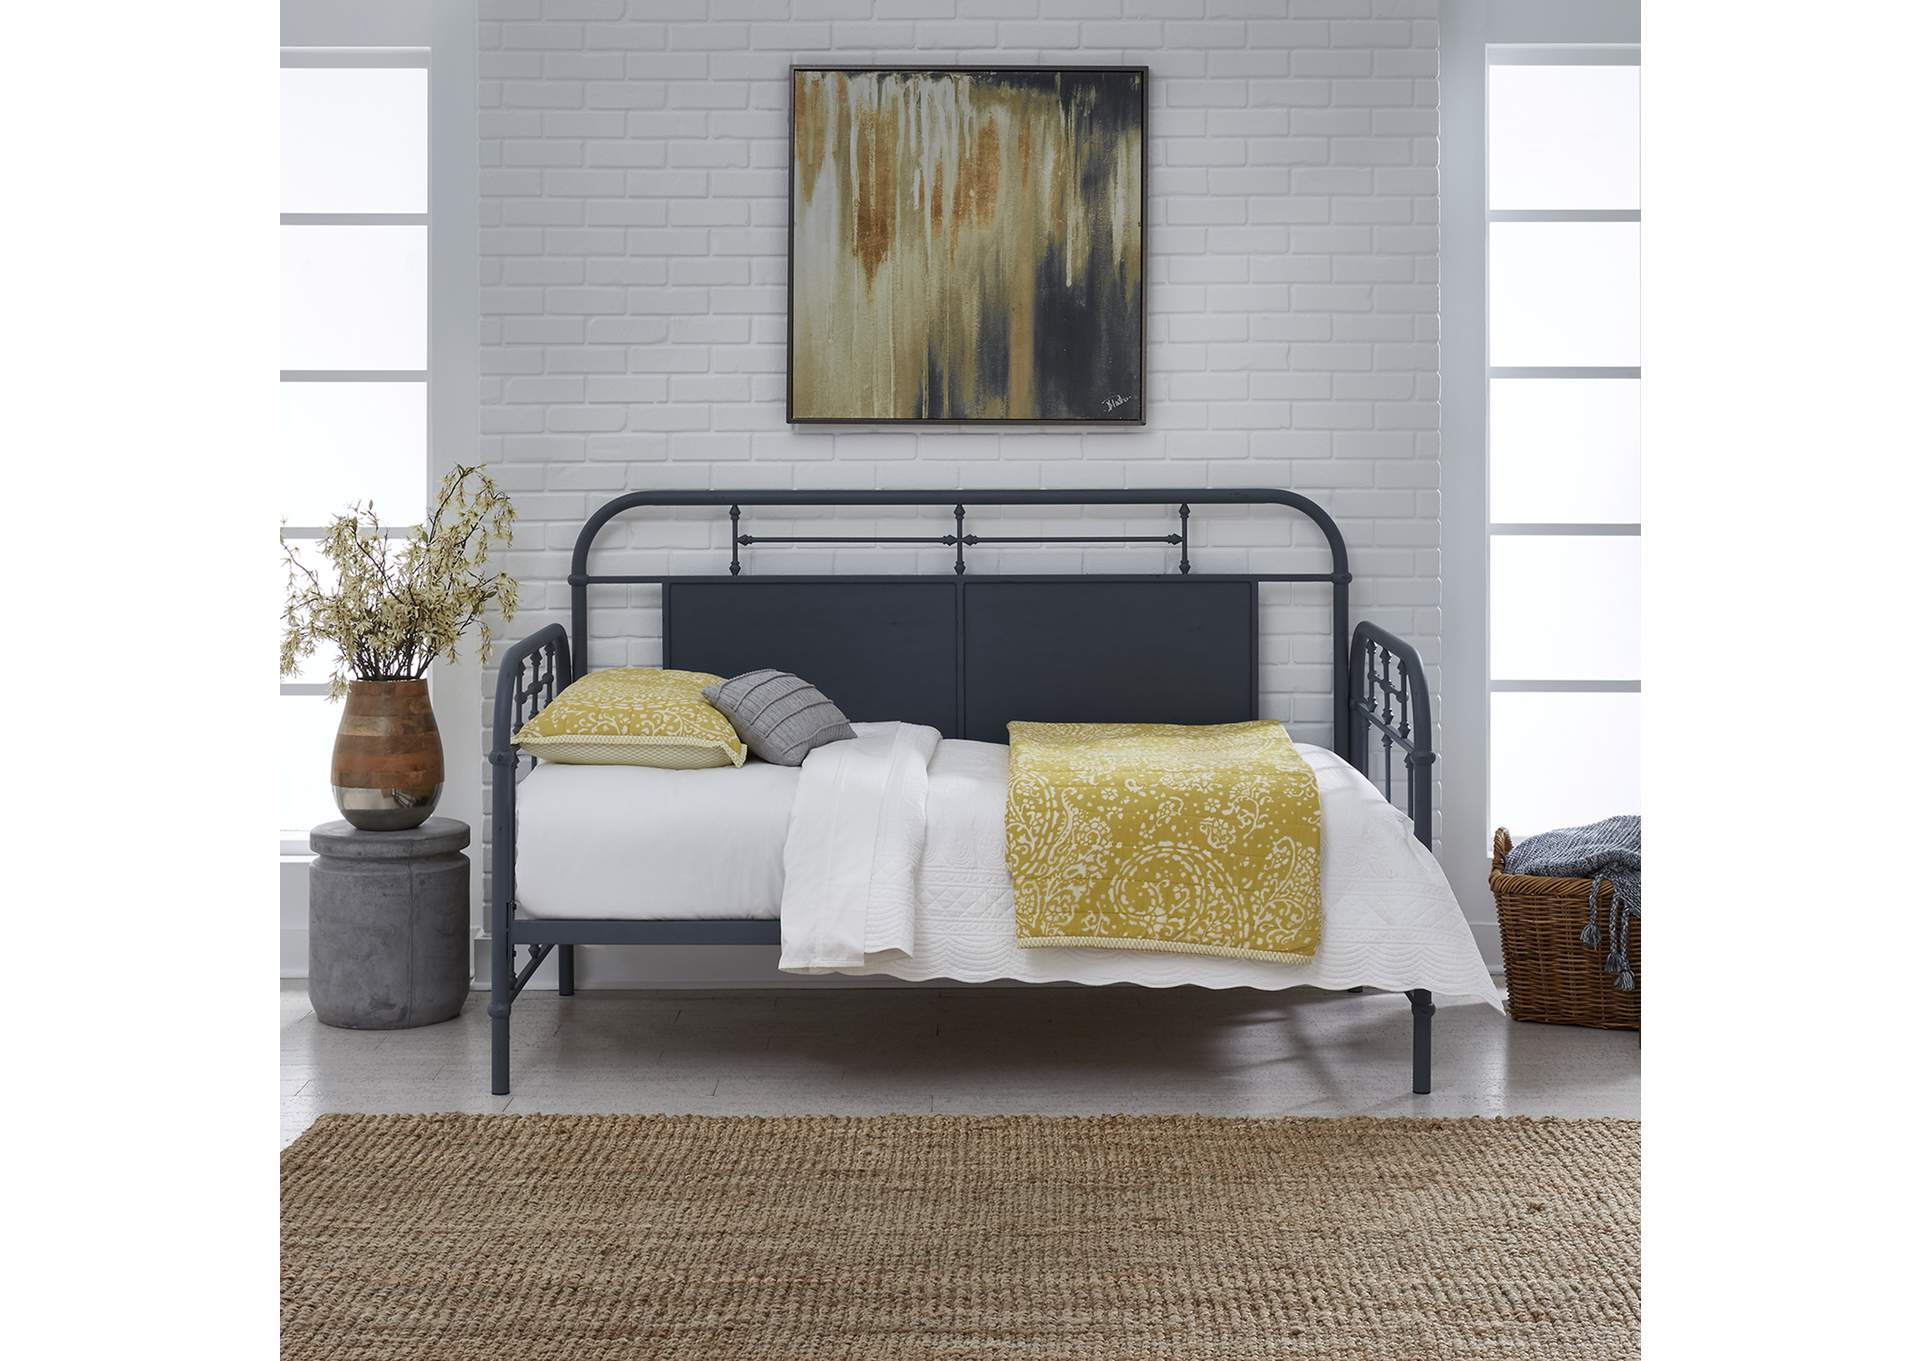 Vintage Series Twin Metal Day Bed - Navy,Liberty